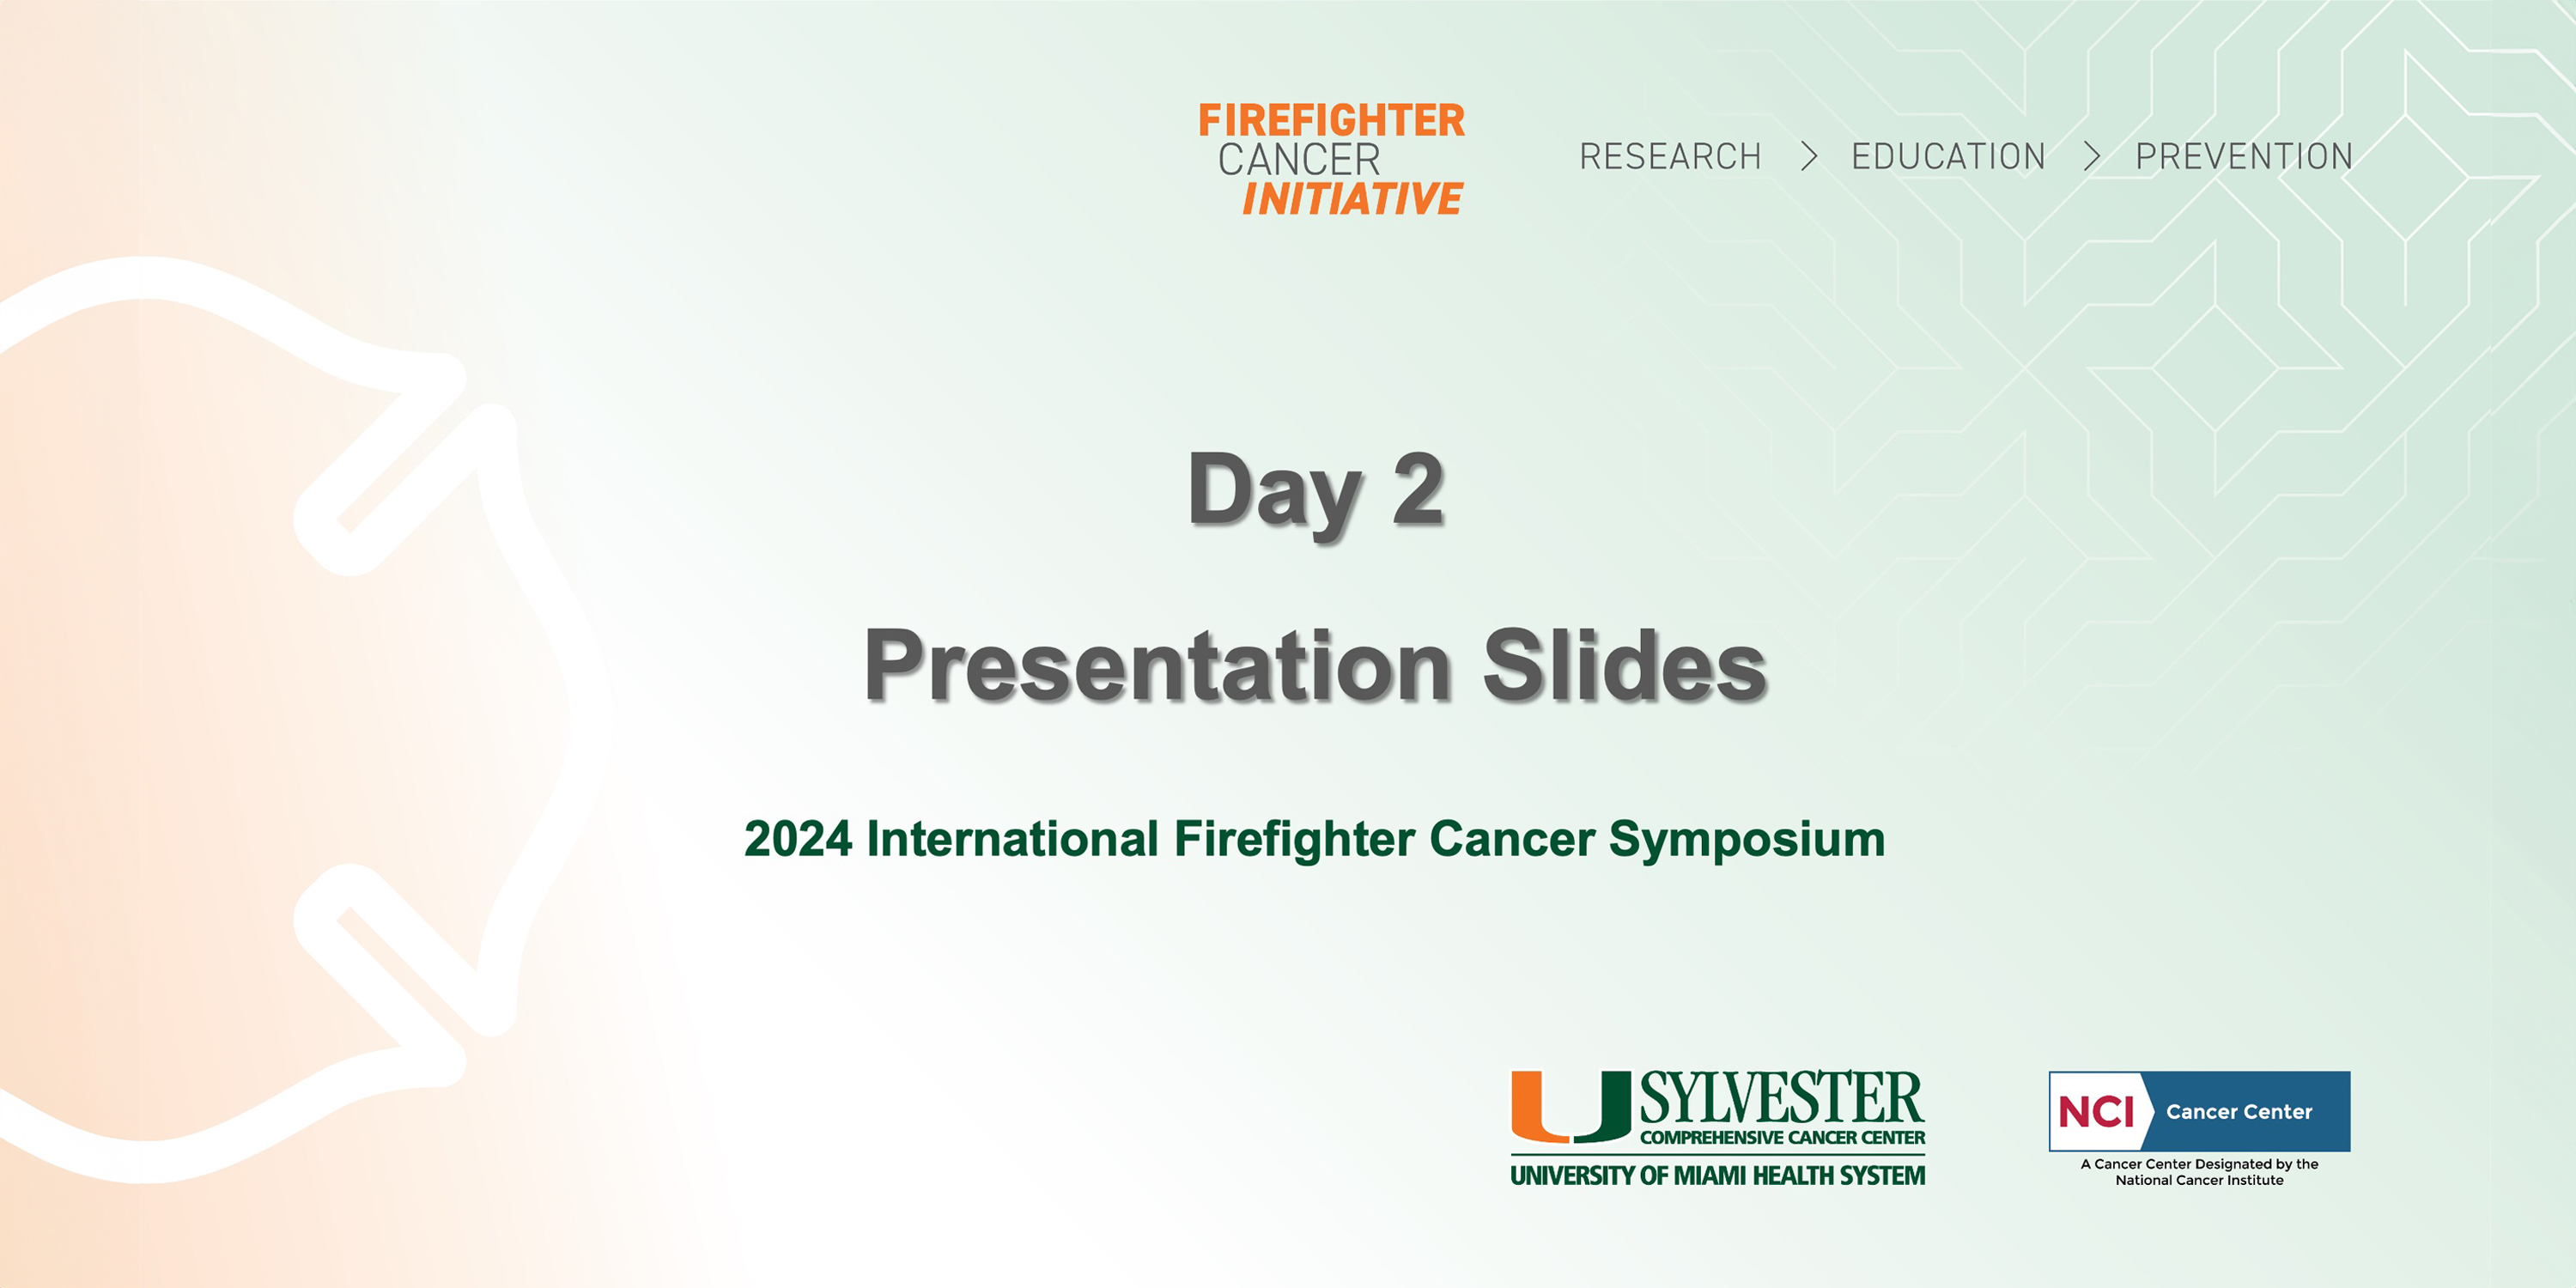 Decorative cover for the 2024 Firefighter Cancer Initiative Symposium, Day 2 Presentation Slides